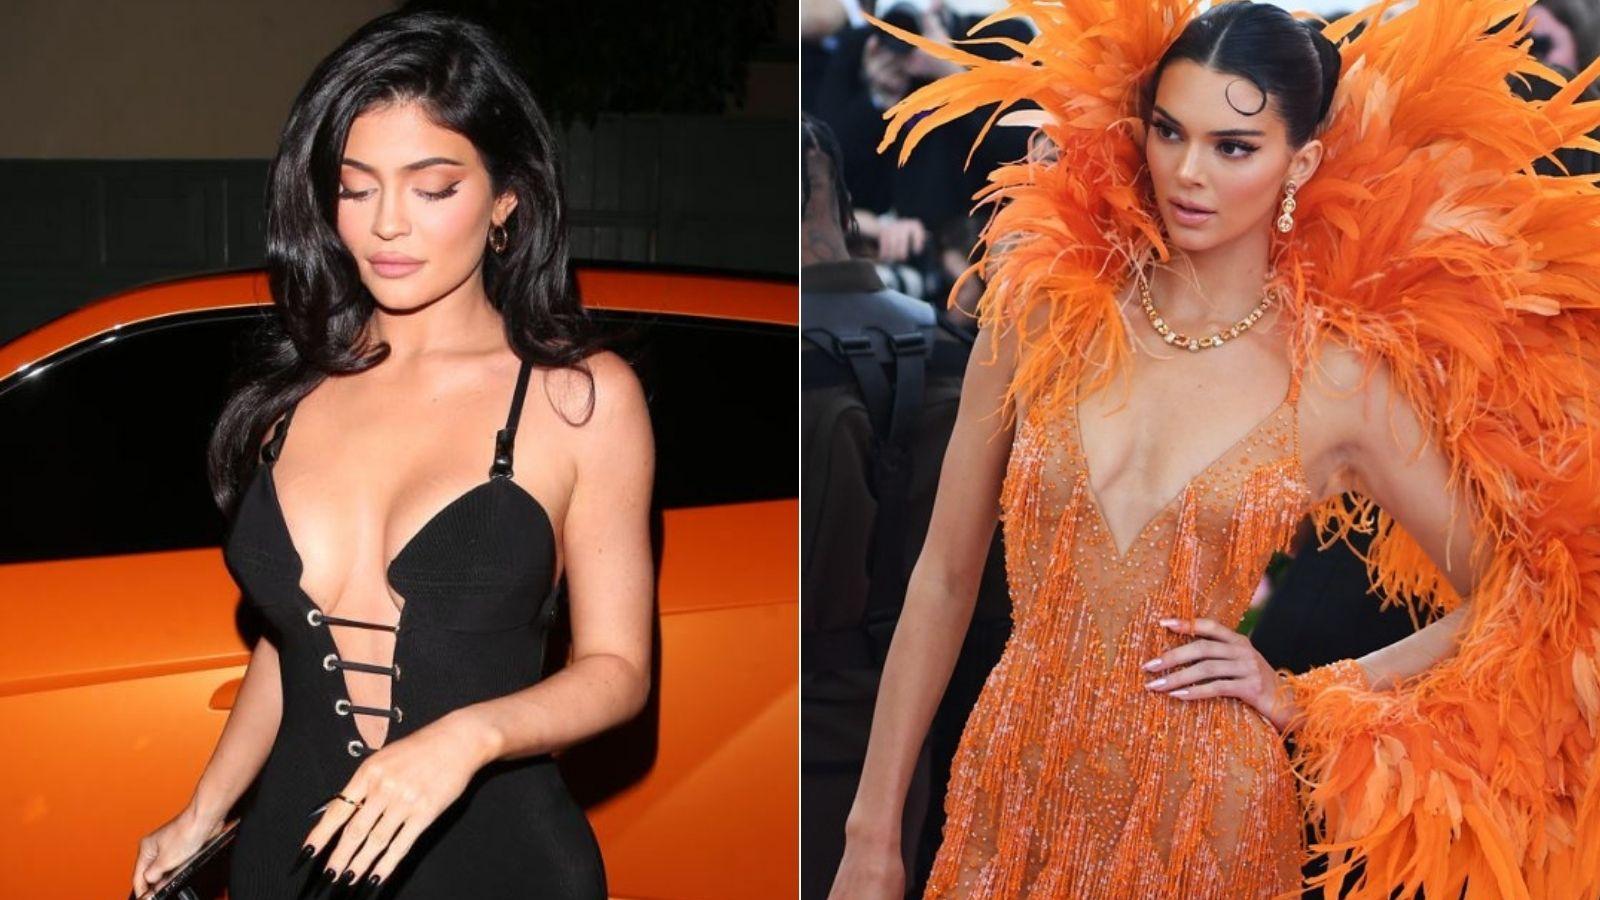 colaj kylie jenner in rochie neagra si kendall jenner in rochie portocalie